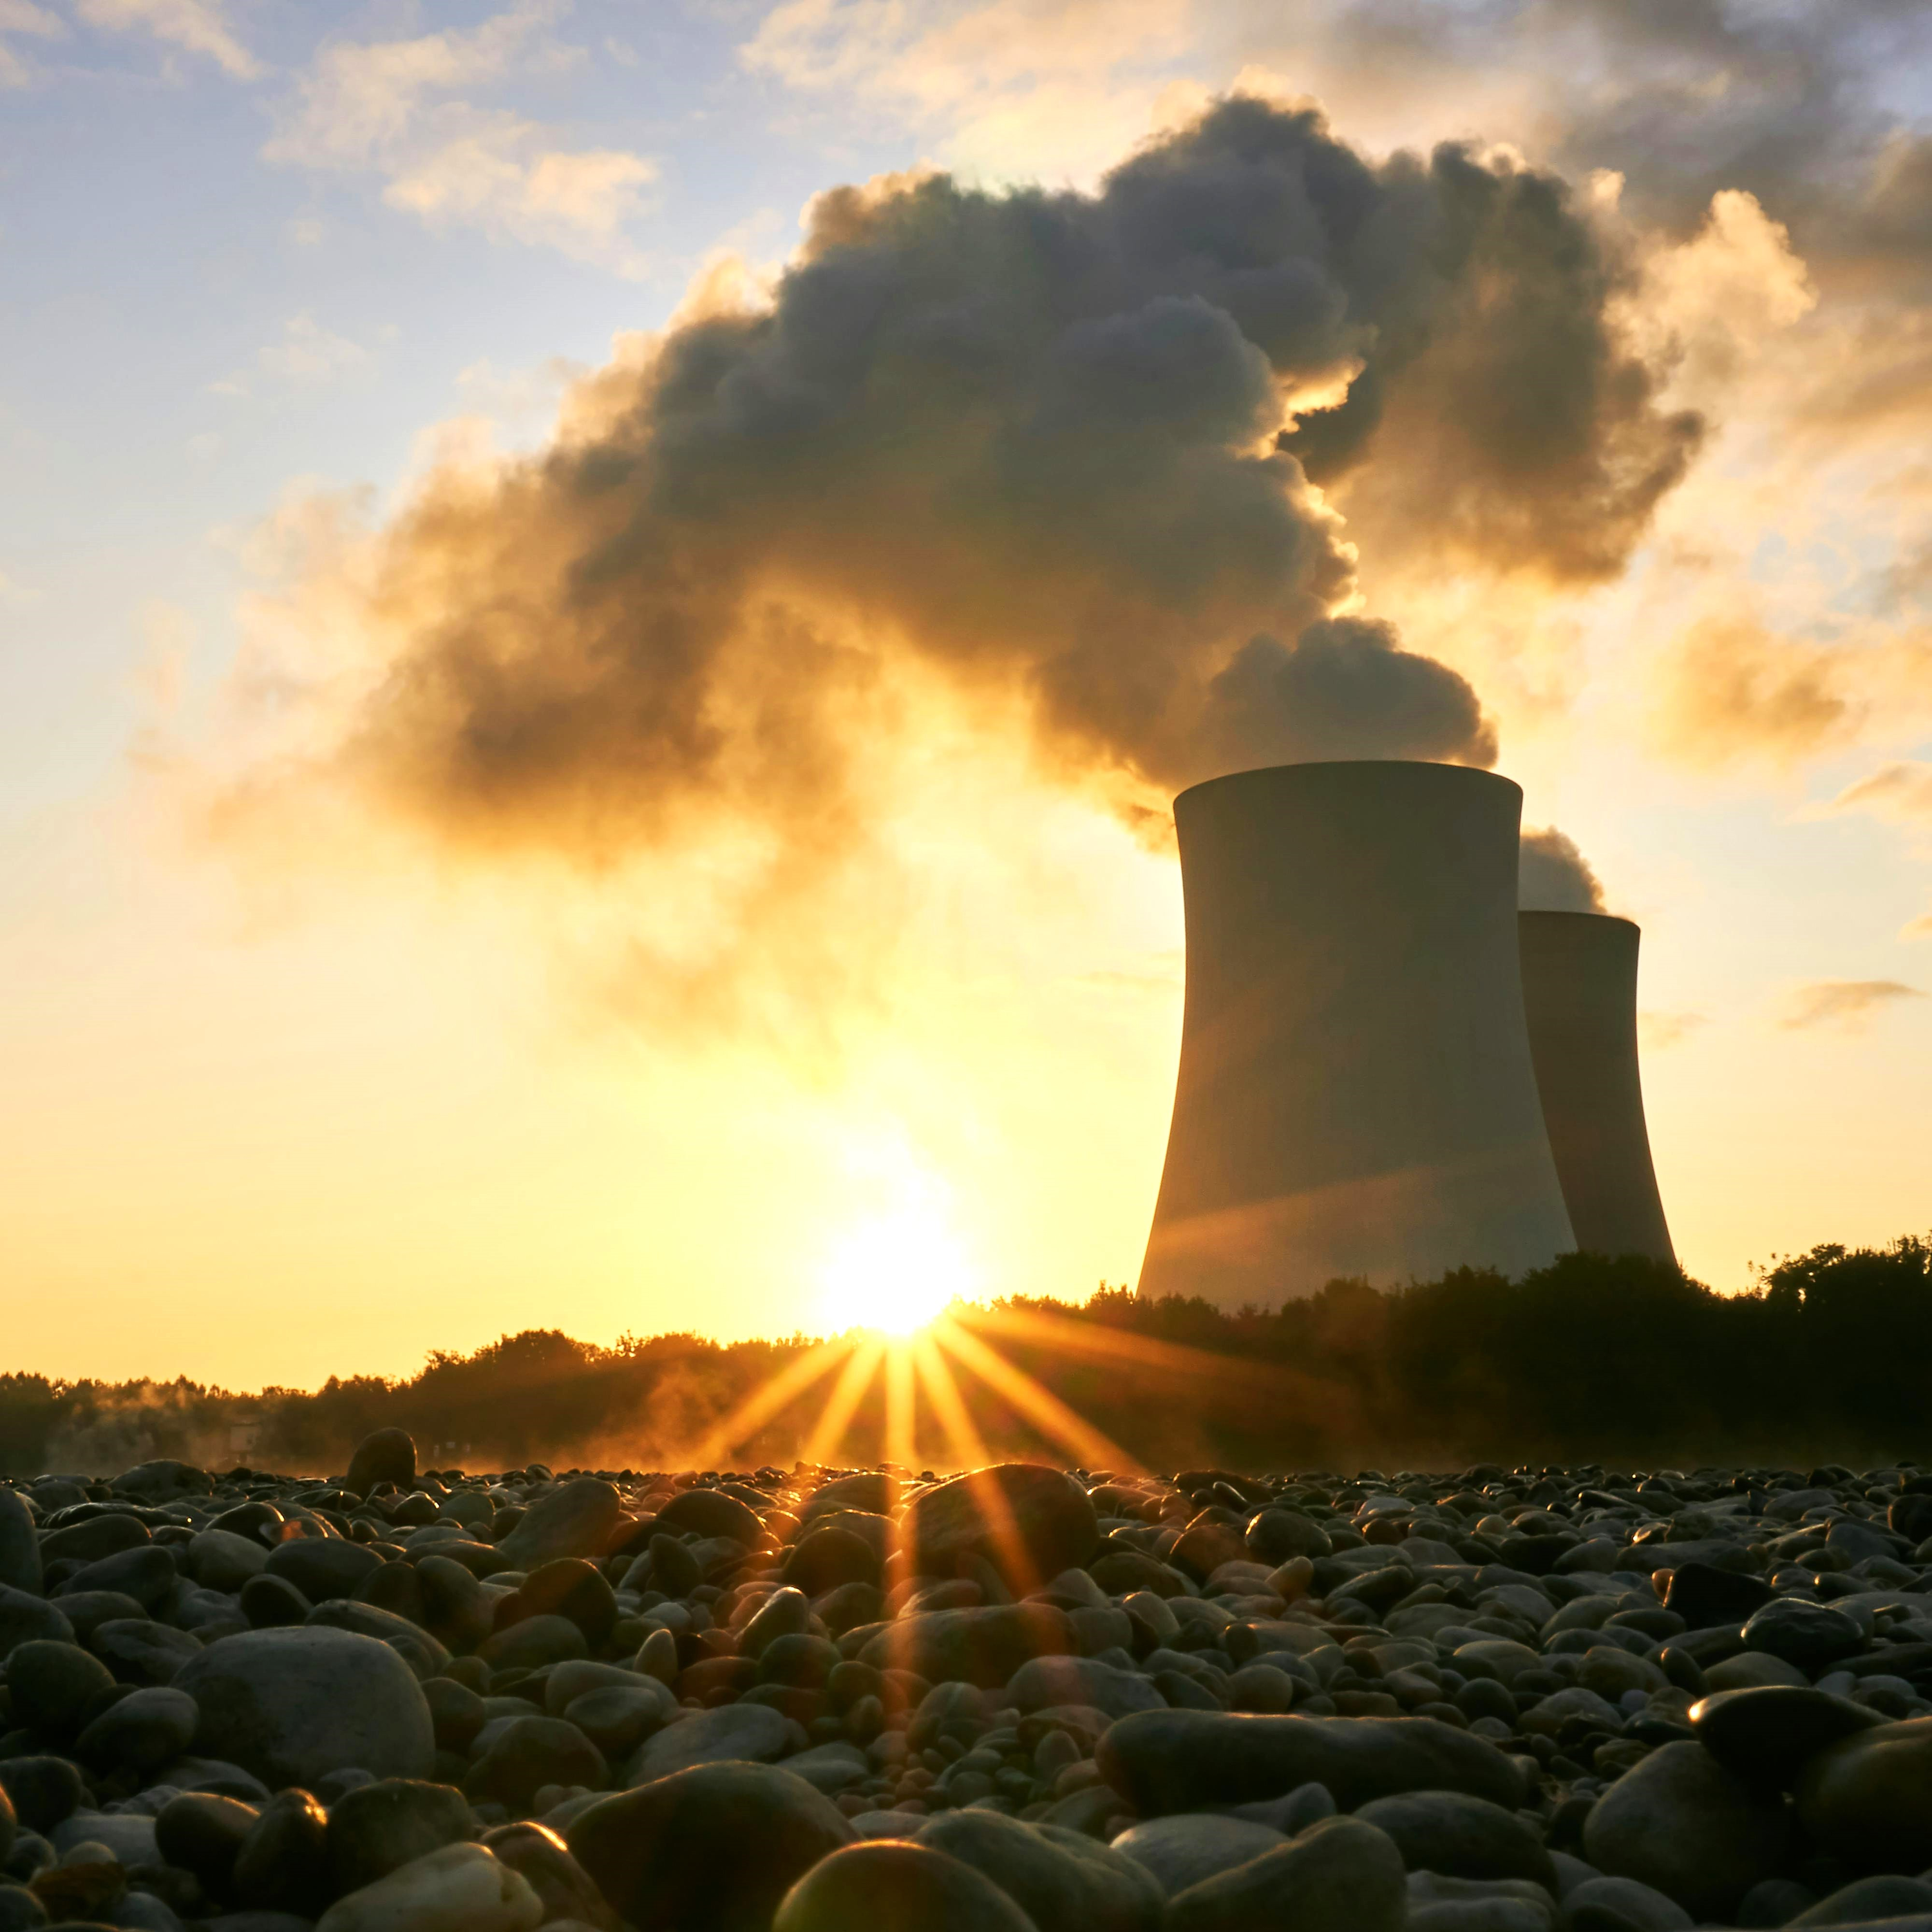 A local expert is destigmatising concerns around nuclear energy